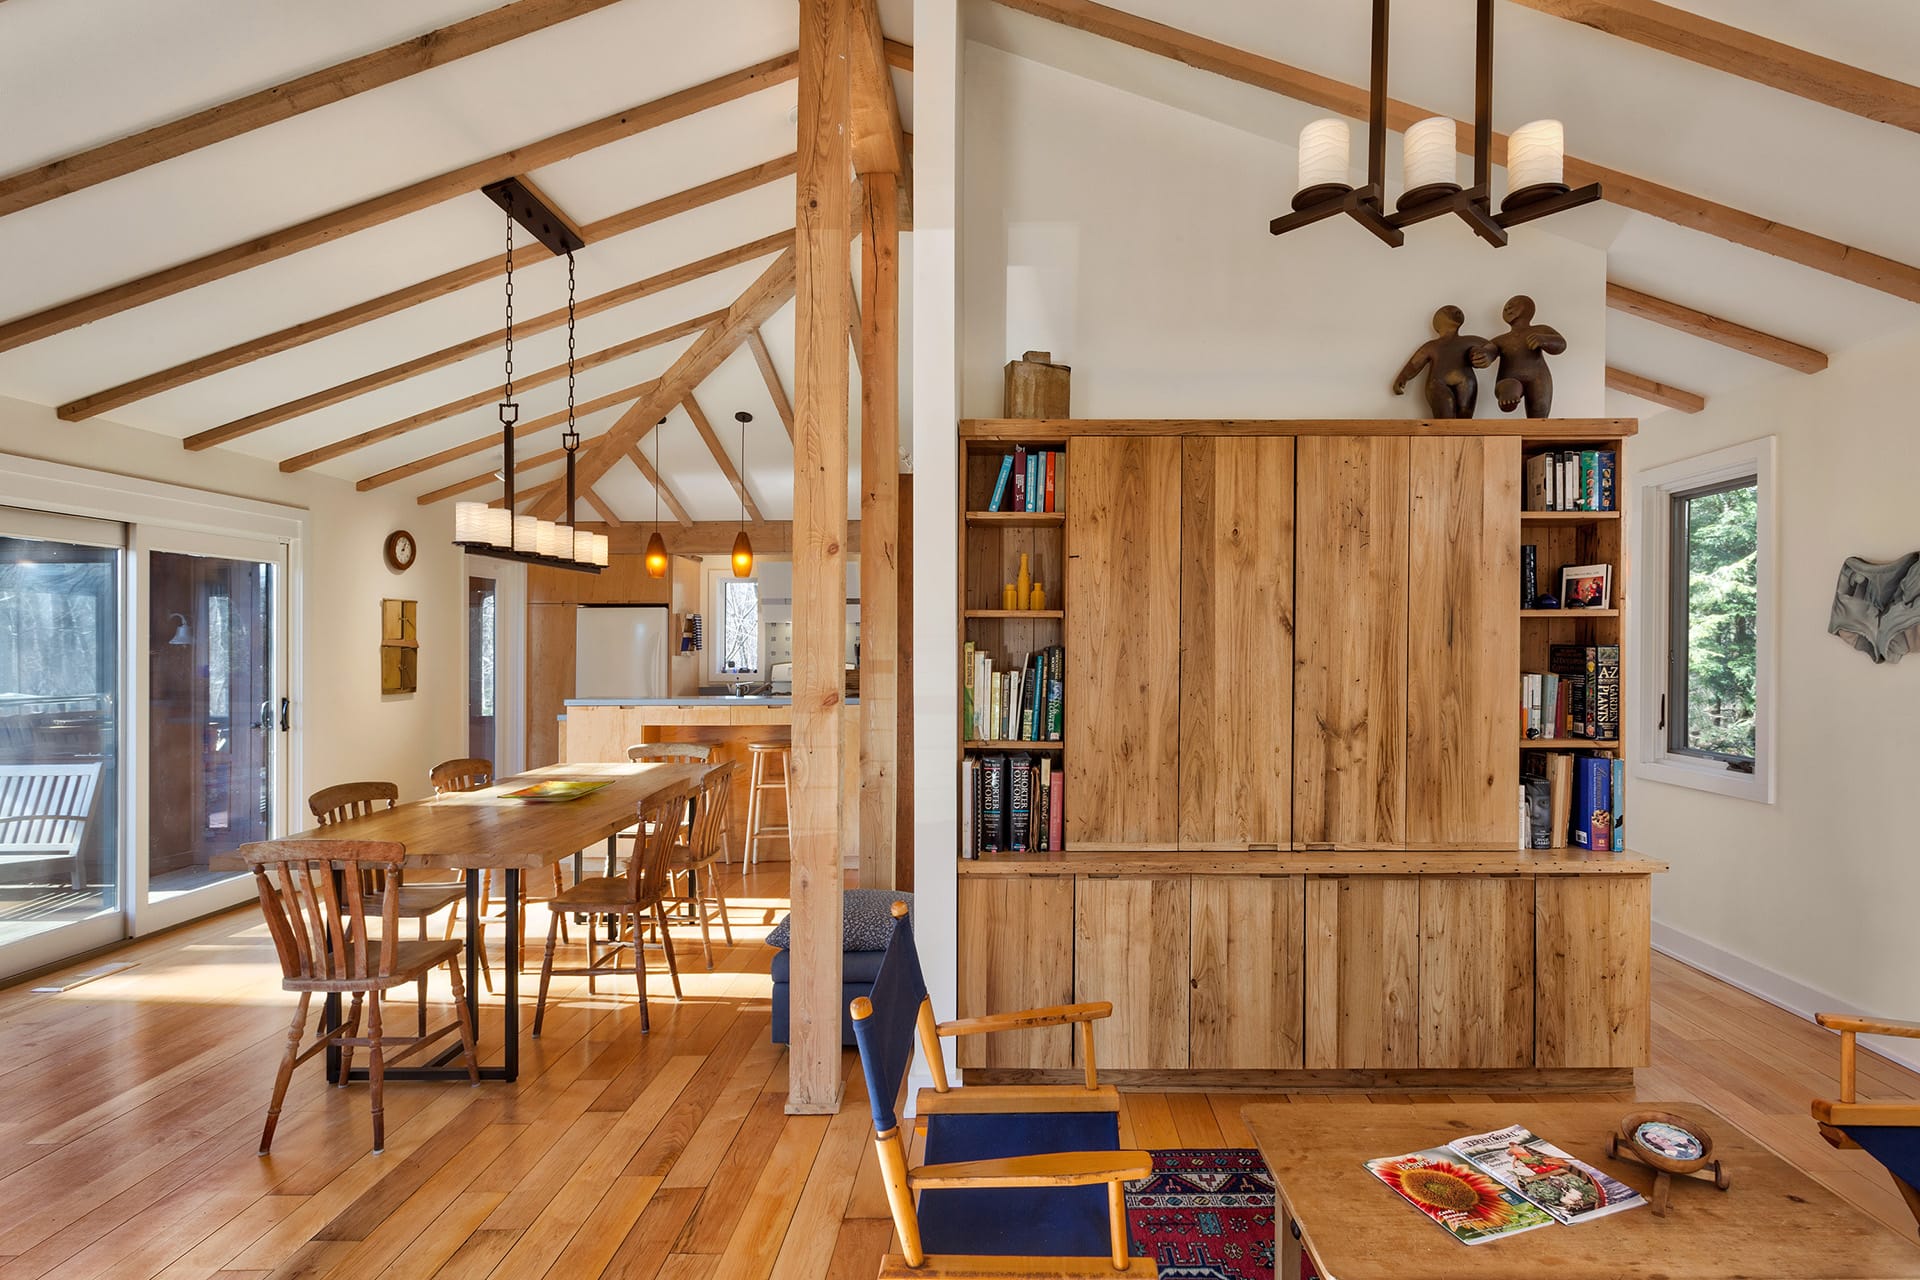 Open living space with wood floors, exposed ceiling beams, and wood furnishings